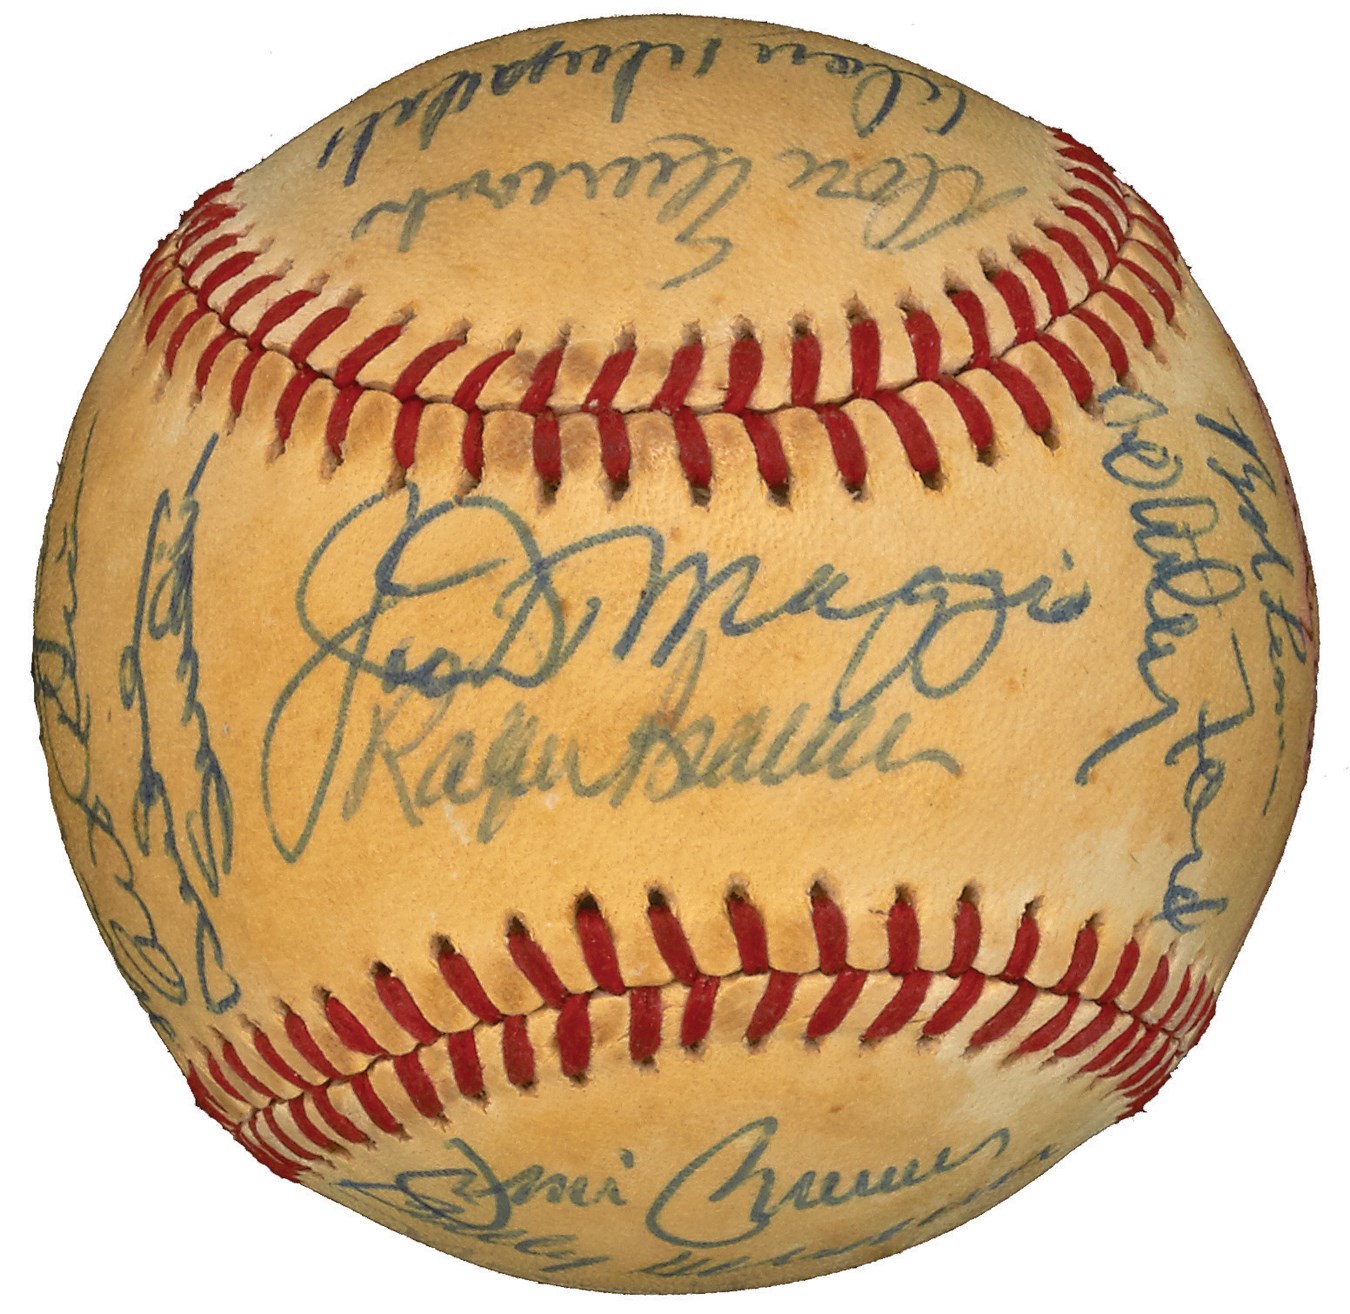 - Hall Of Fame Signed Baseball with Maris, DiMaggio, Koufax & More (24)